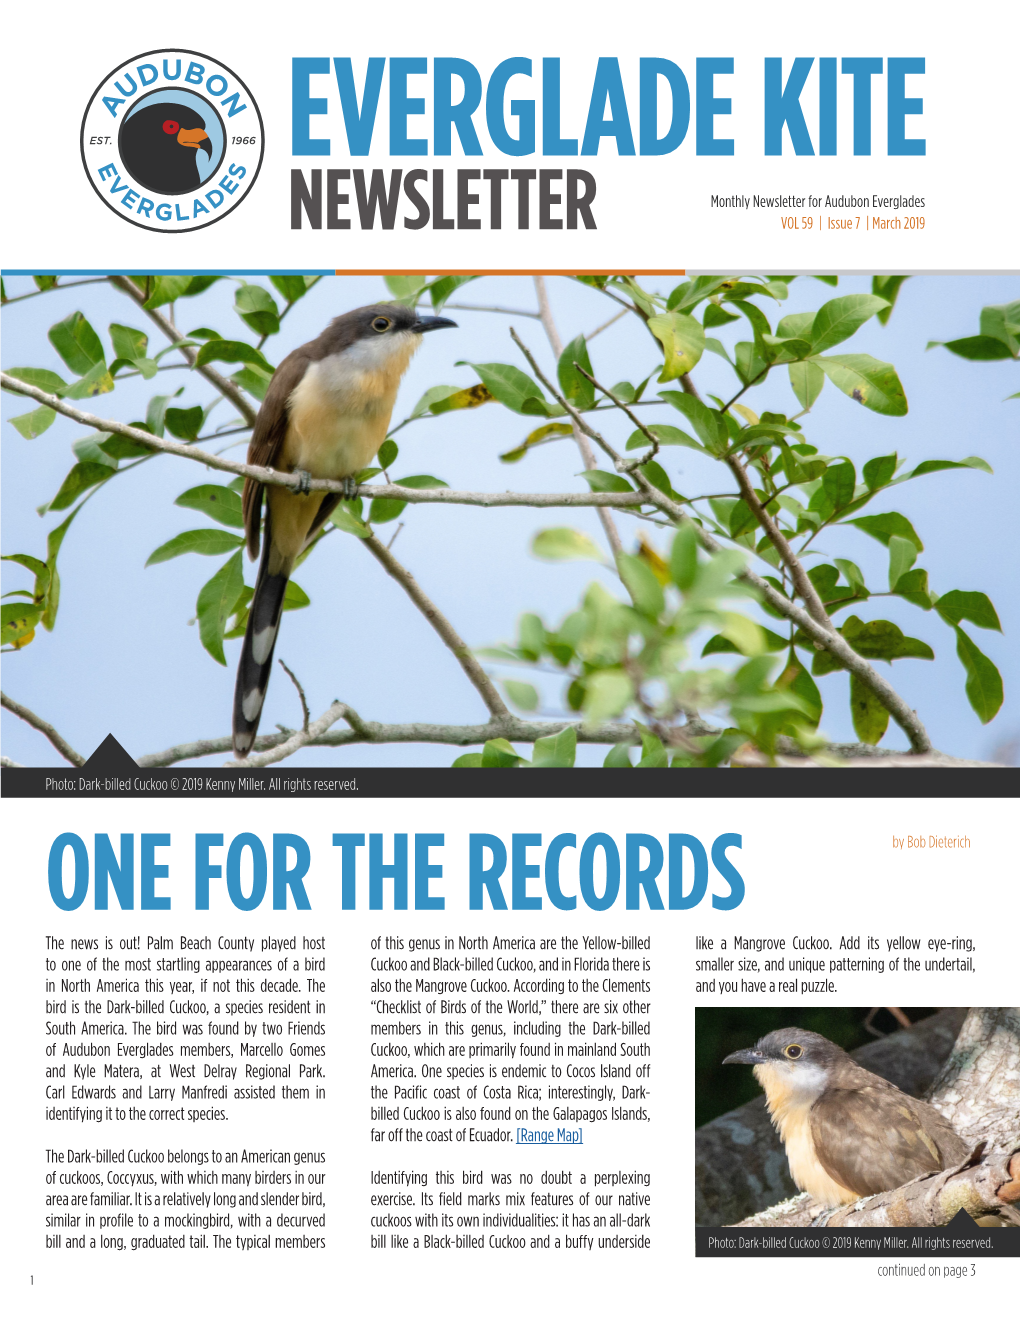 ONE for the RECORDS by Bob Dieterich the News Is Out! Palm Beach County Played Host of This Genus in North America Are the Yellow-Billed Like a Mangrove Cuckoo